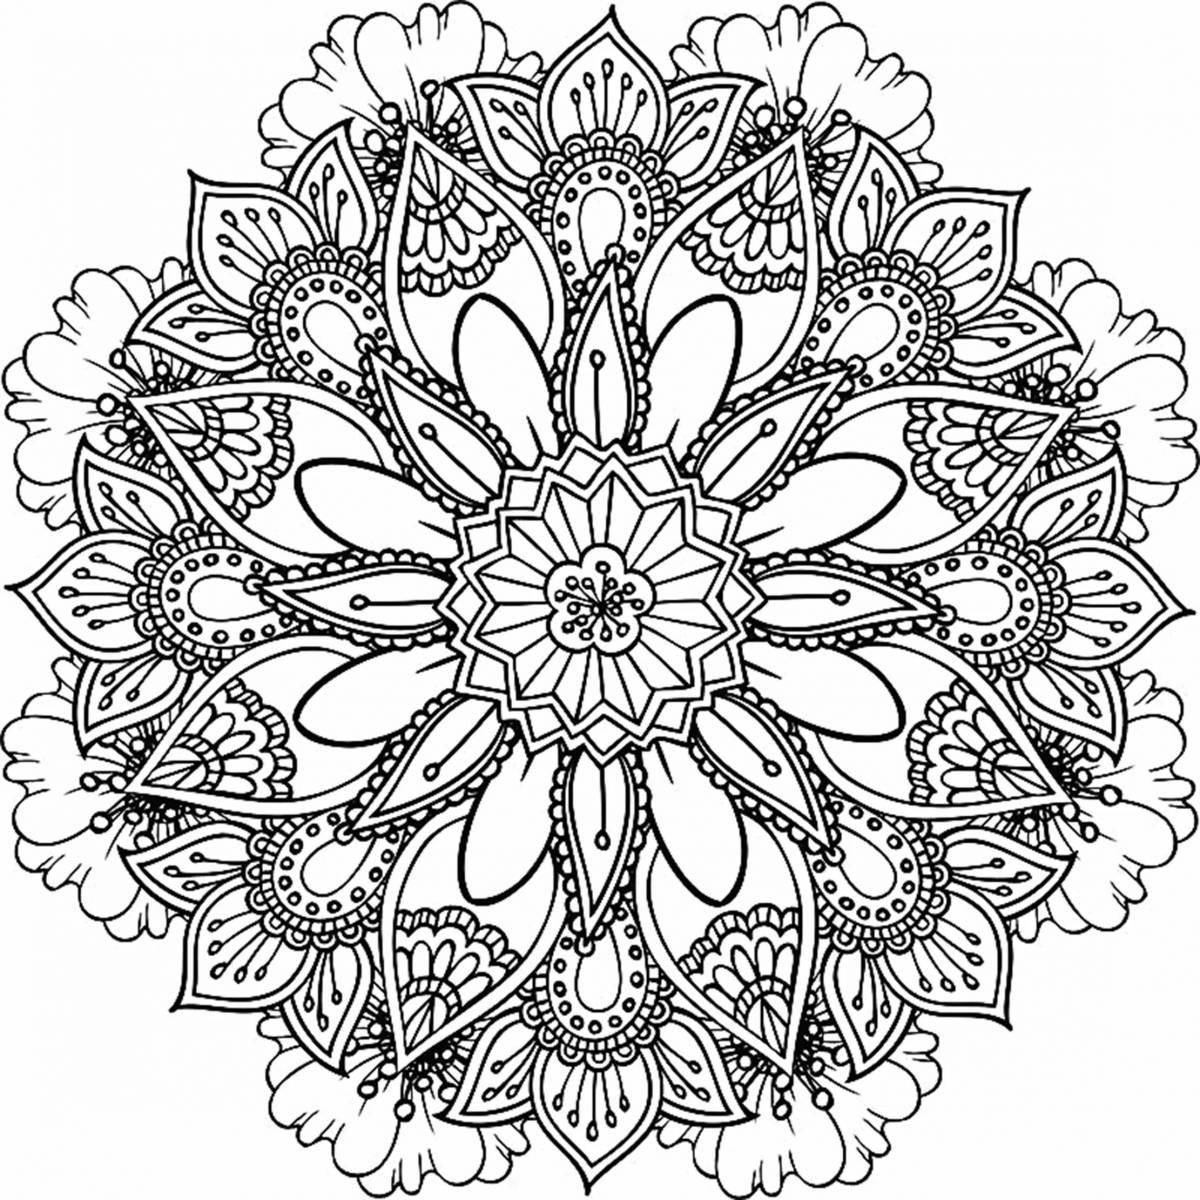 High quality mandala coloring pages